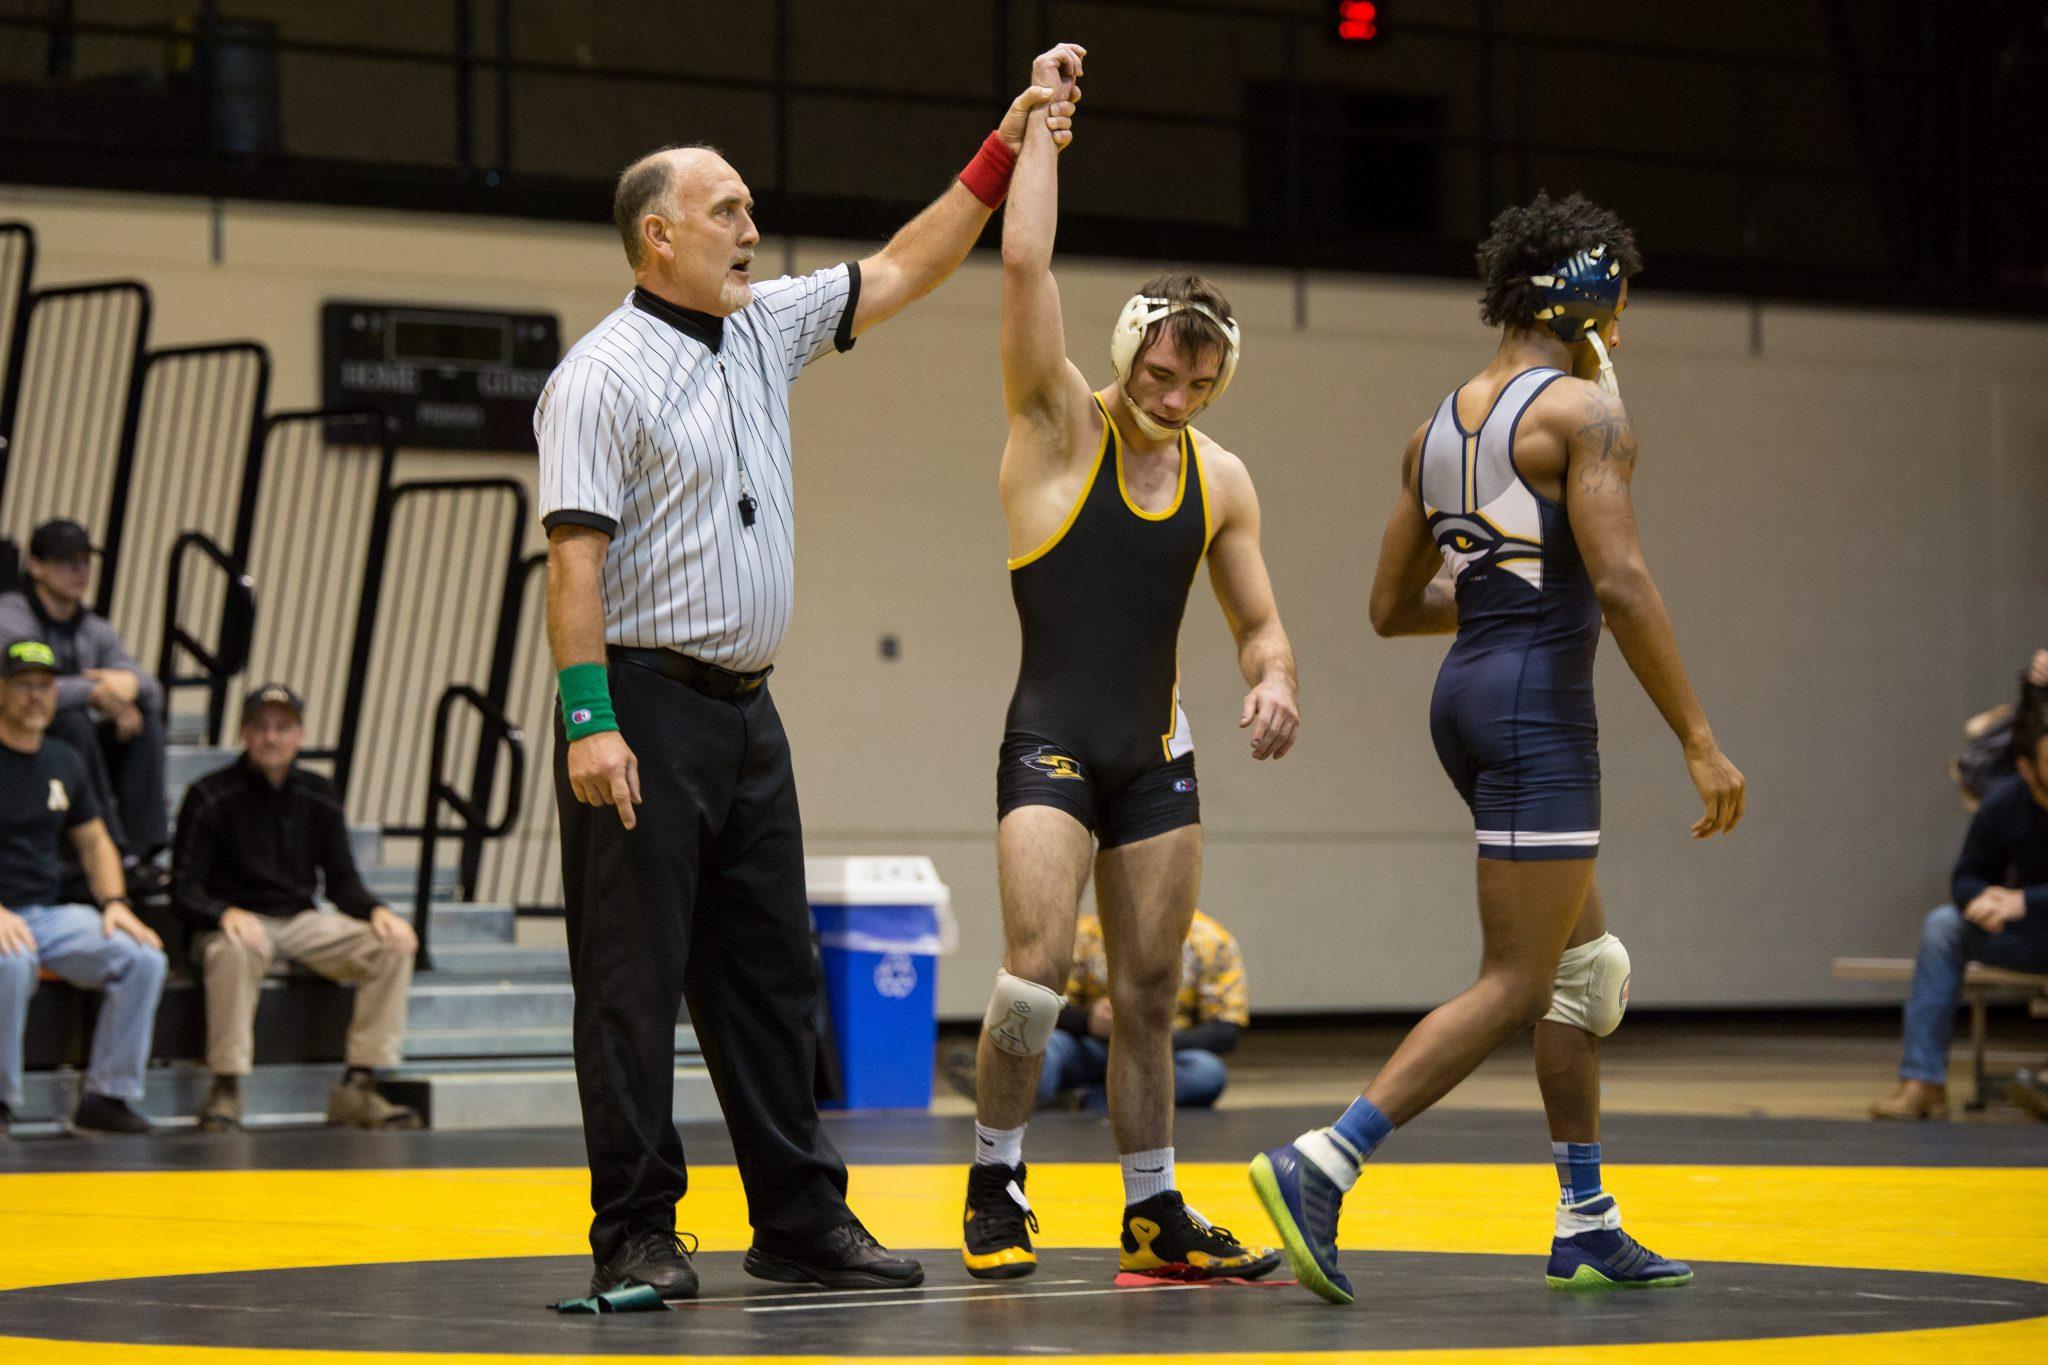 App State’s Vito Pasone secures a major decision over Chattanooga’s Alonzo Allen.